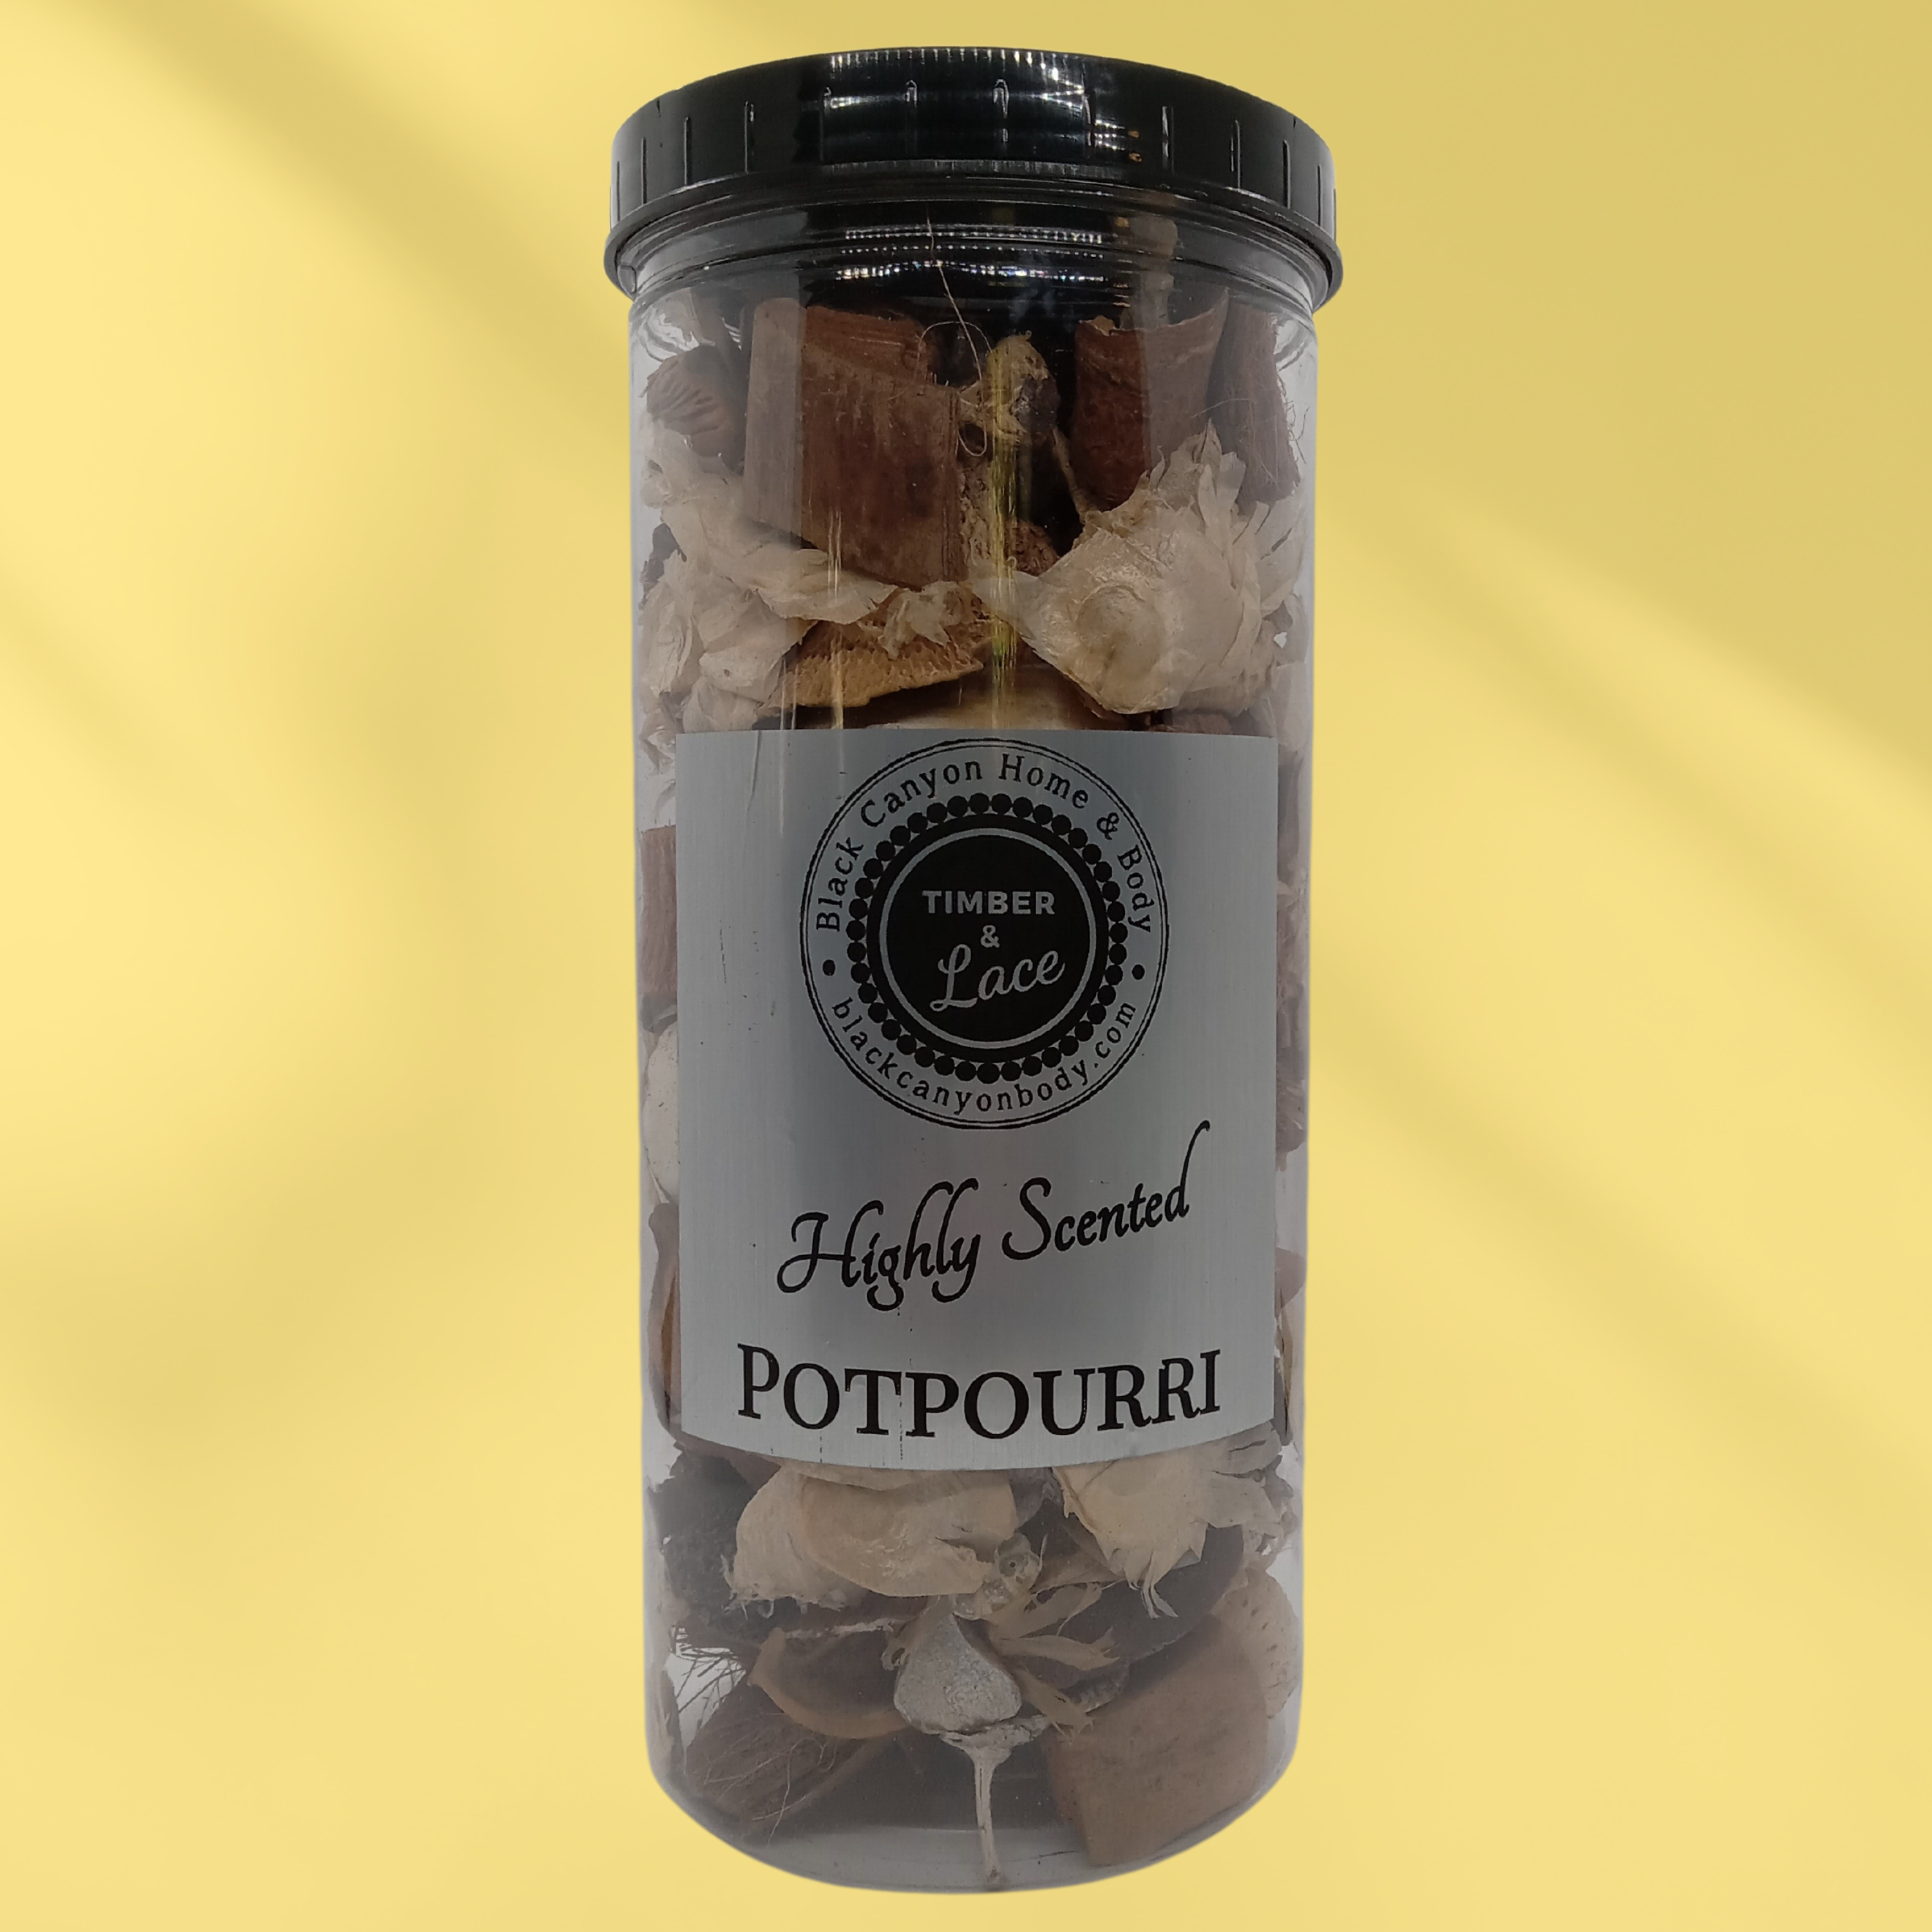 Timber & Lace Corn Chips Scented Potpourri